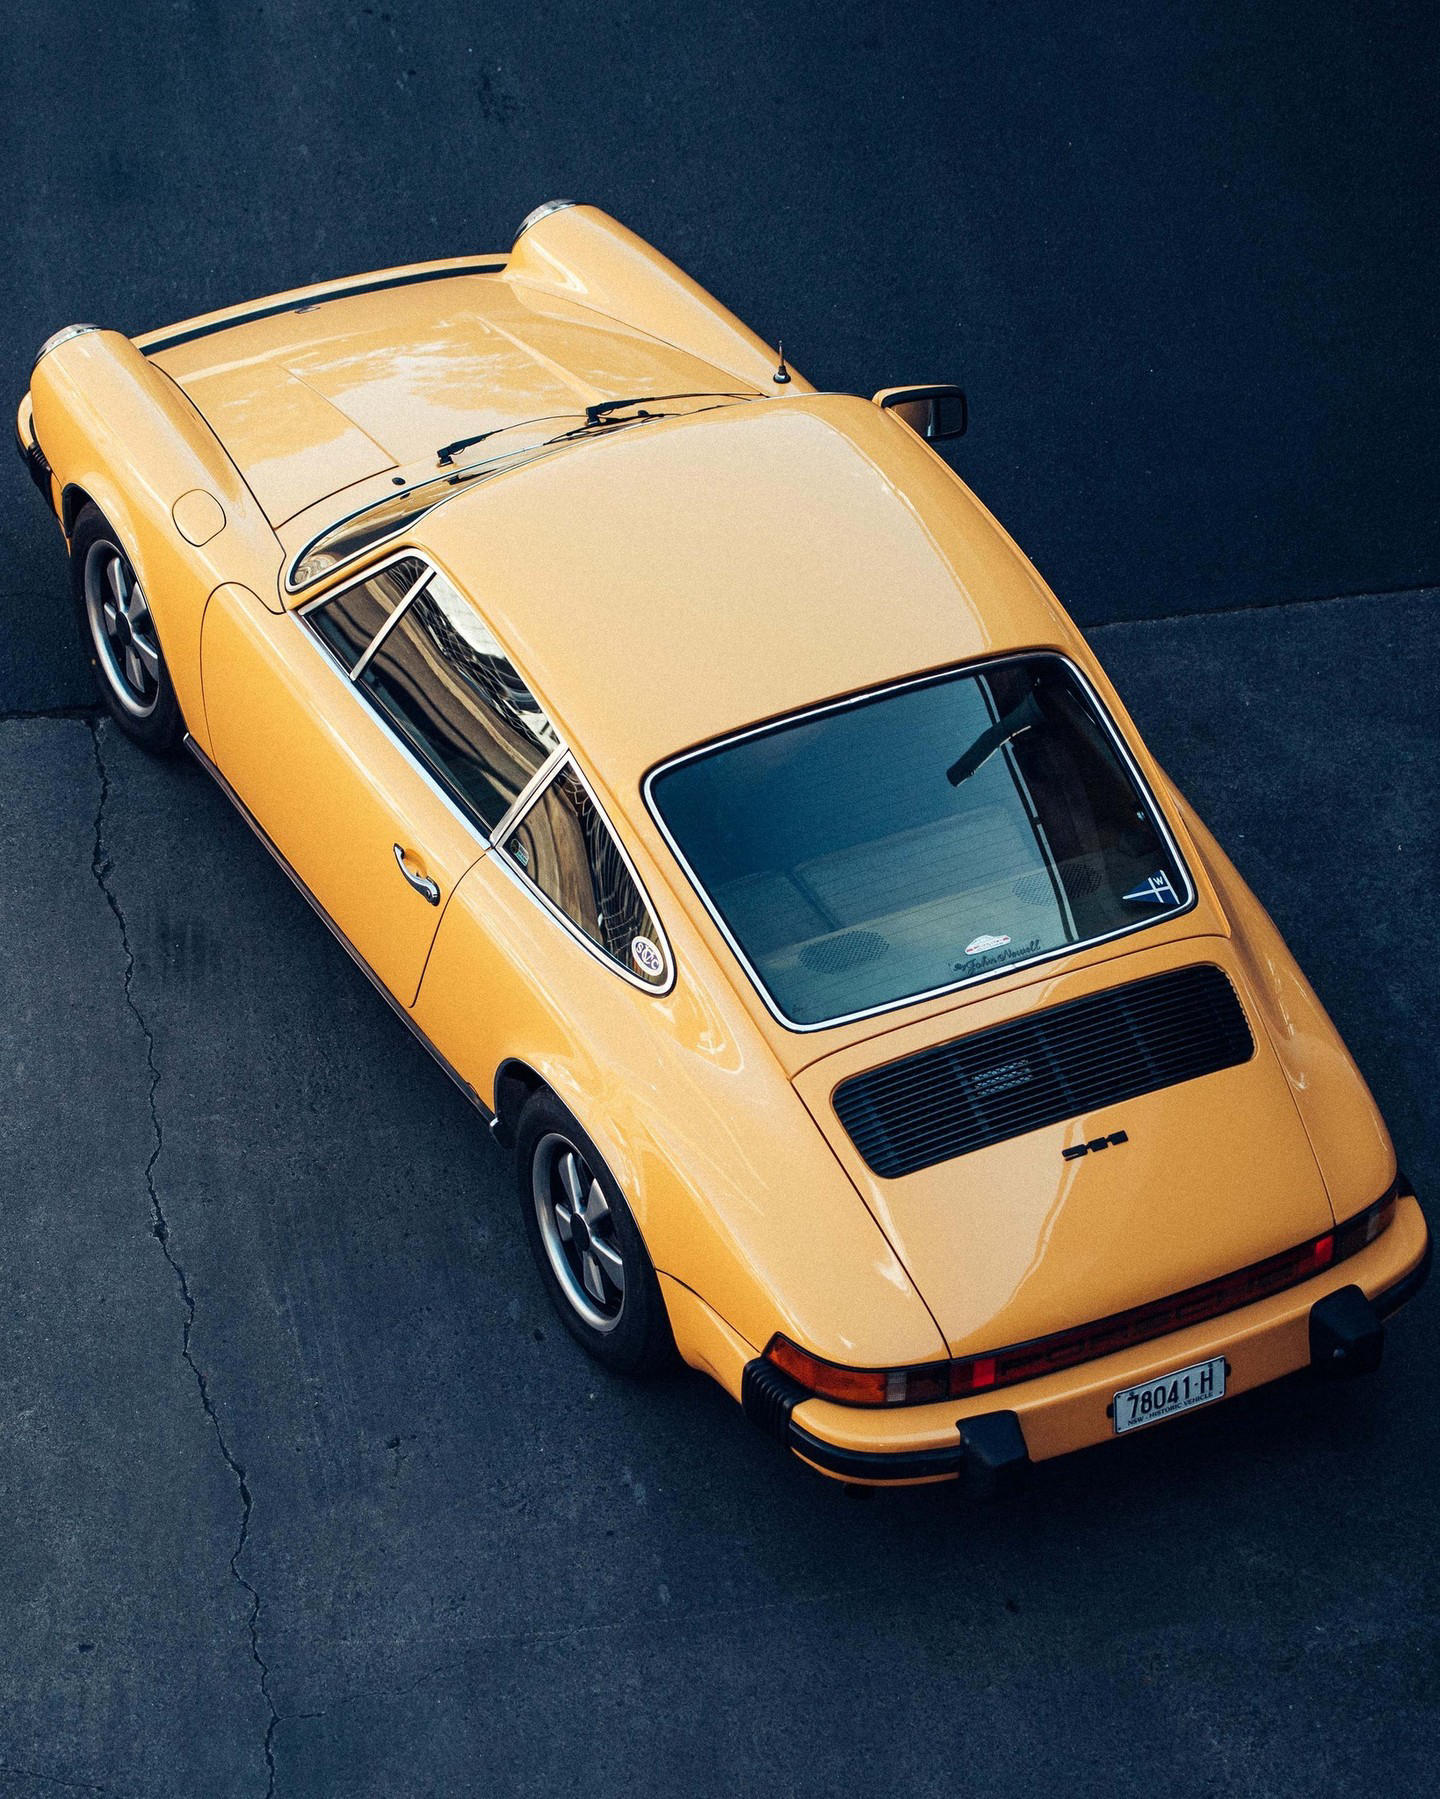 image  1 Porsche - Meet Lesley – the classic 1977 911 that #thomaswalk named after the lady who sold it to hi